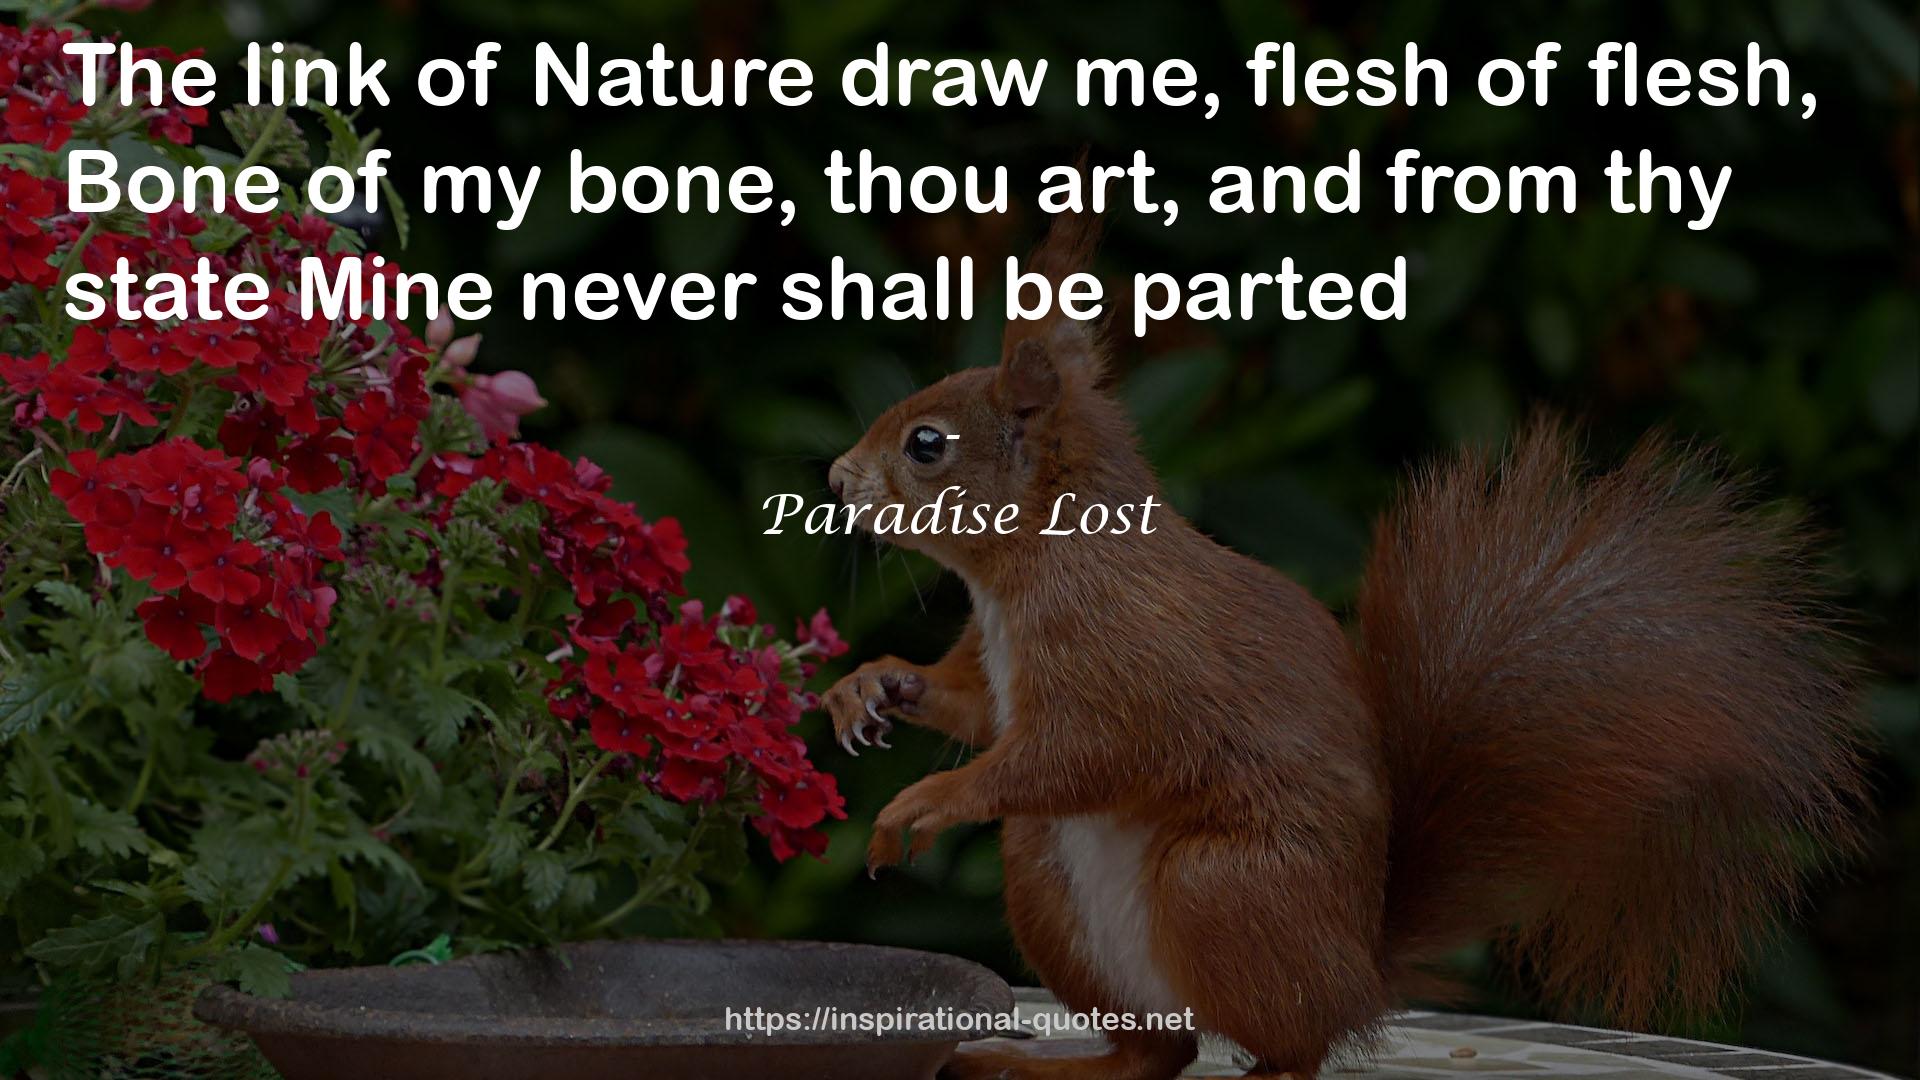 Paradise Lost QUOTES